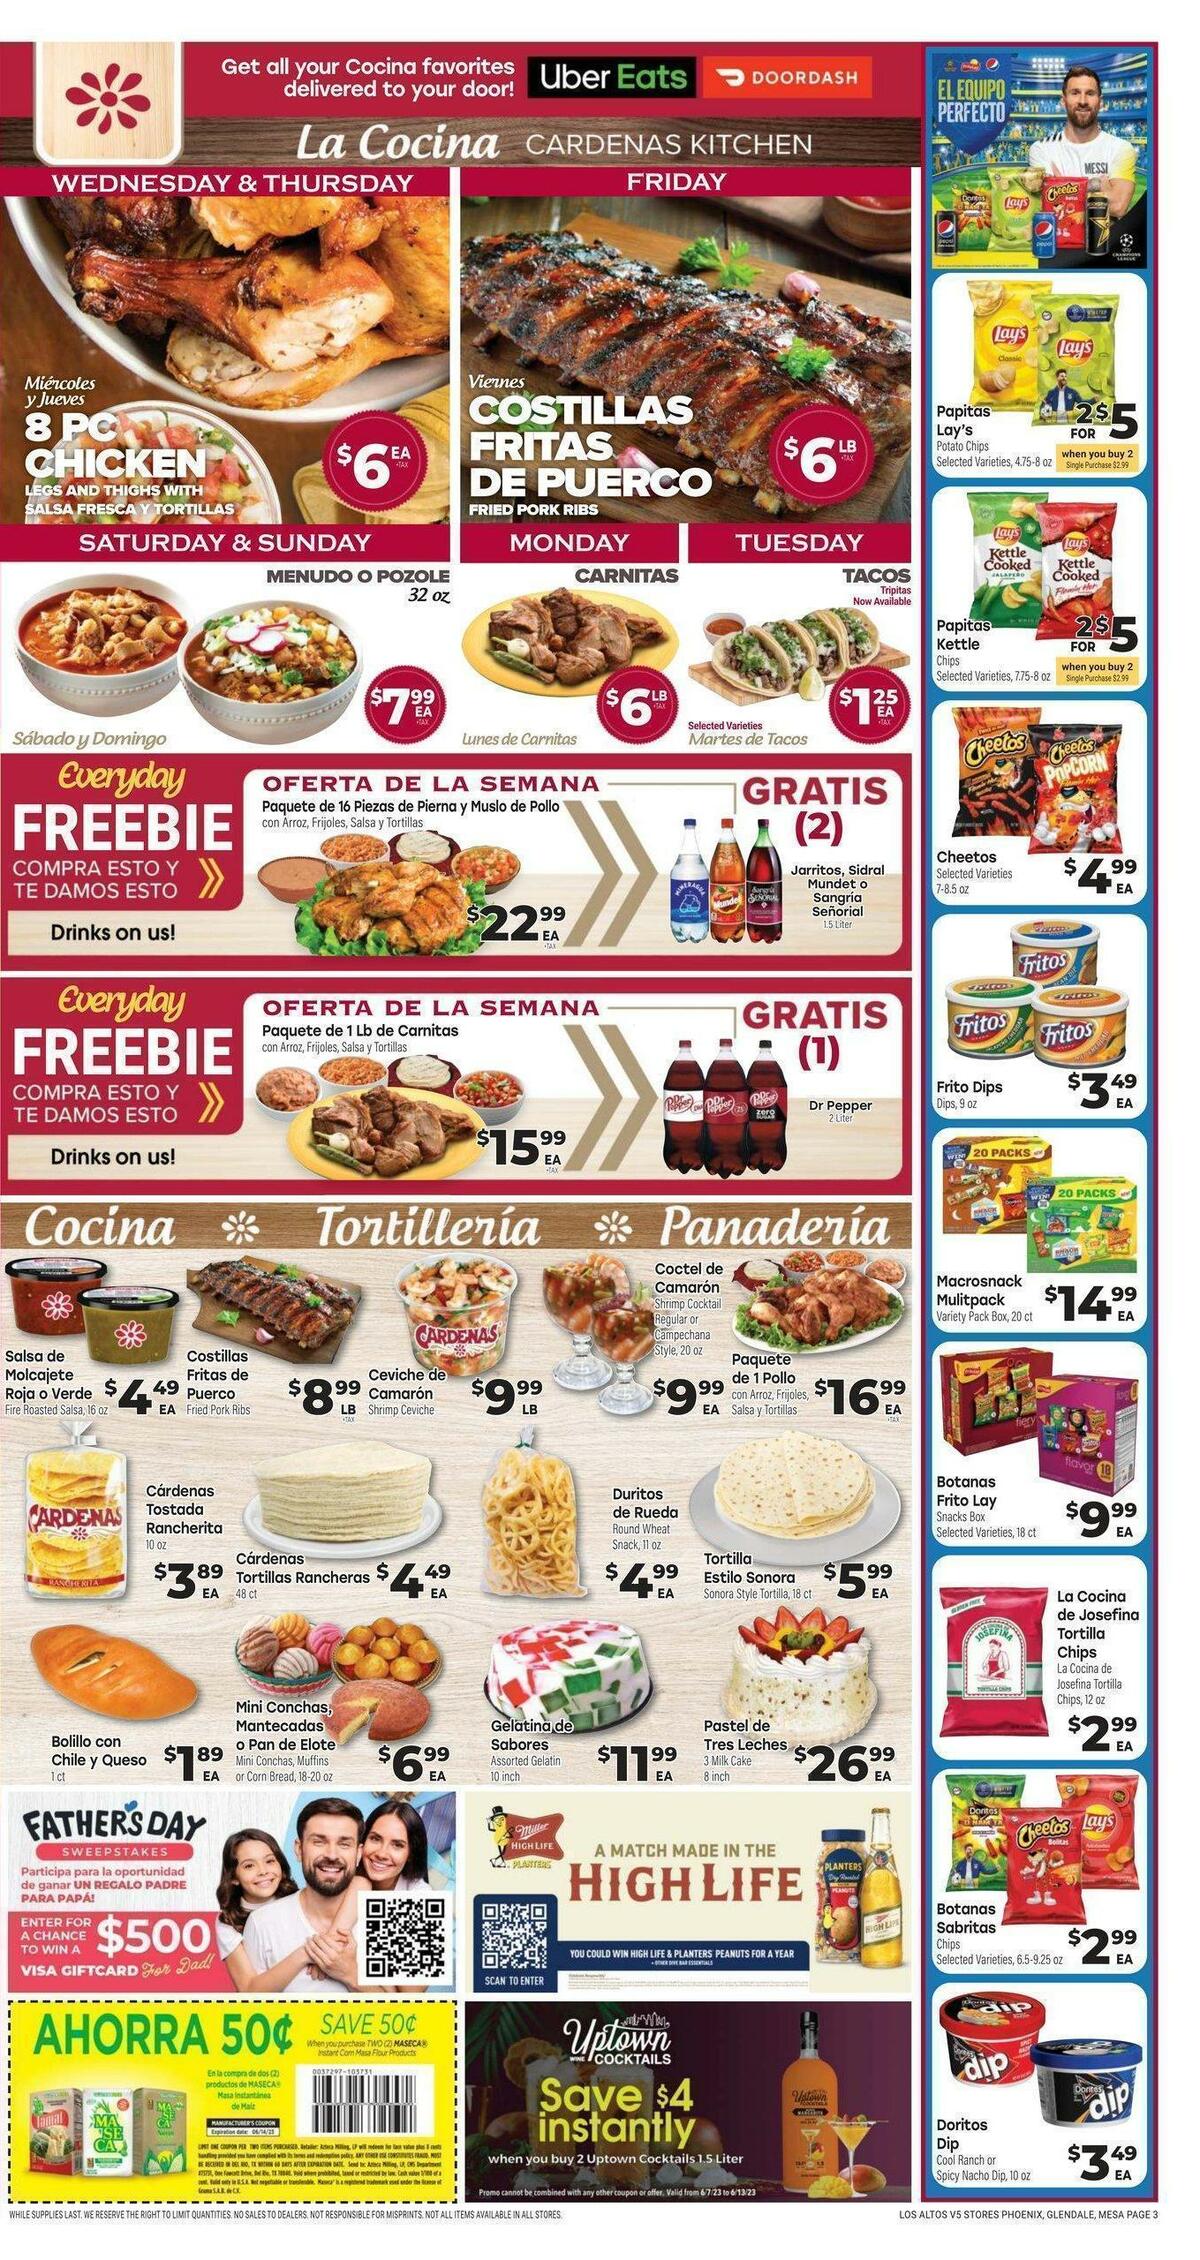 Cardenas Market Weekly Ad from June 7